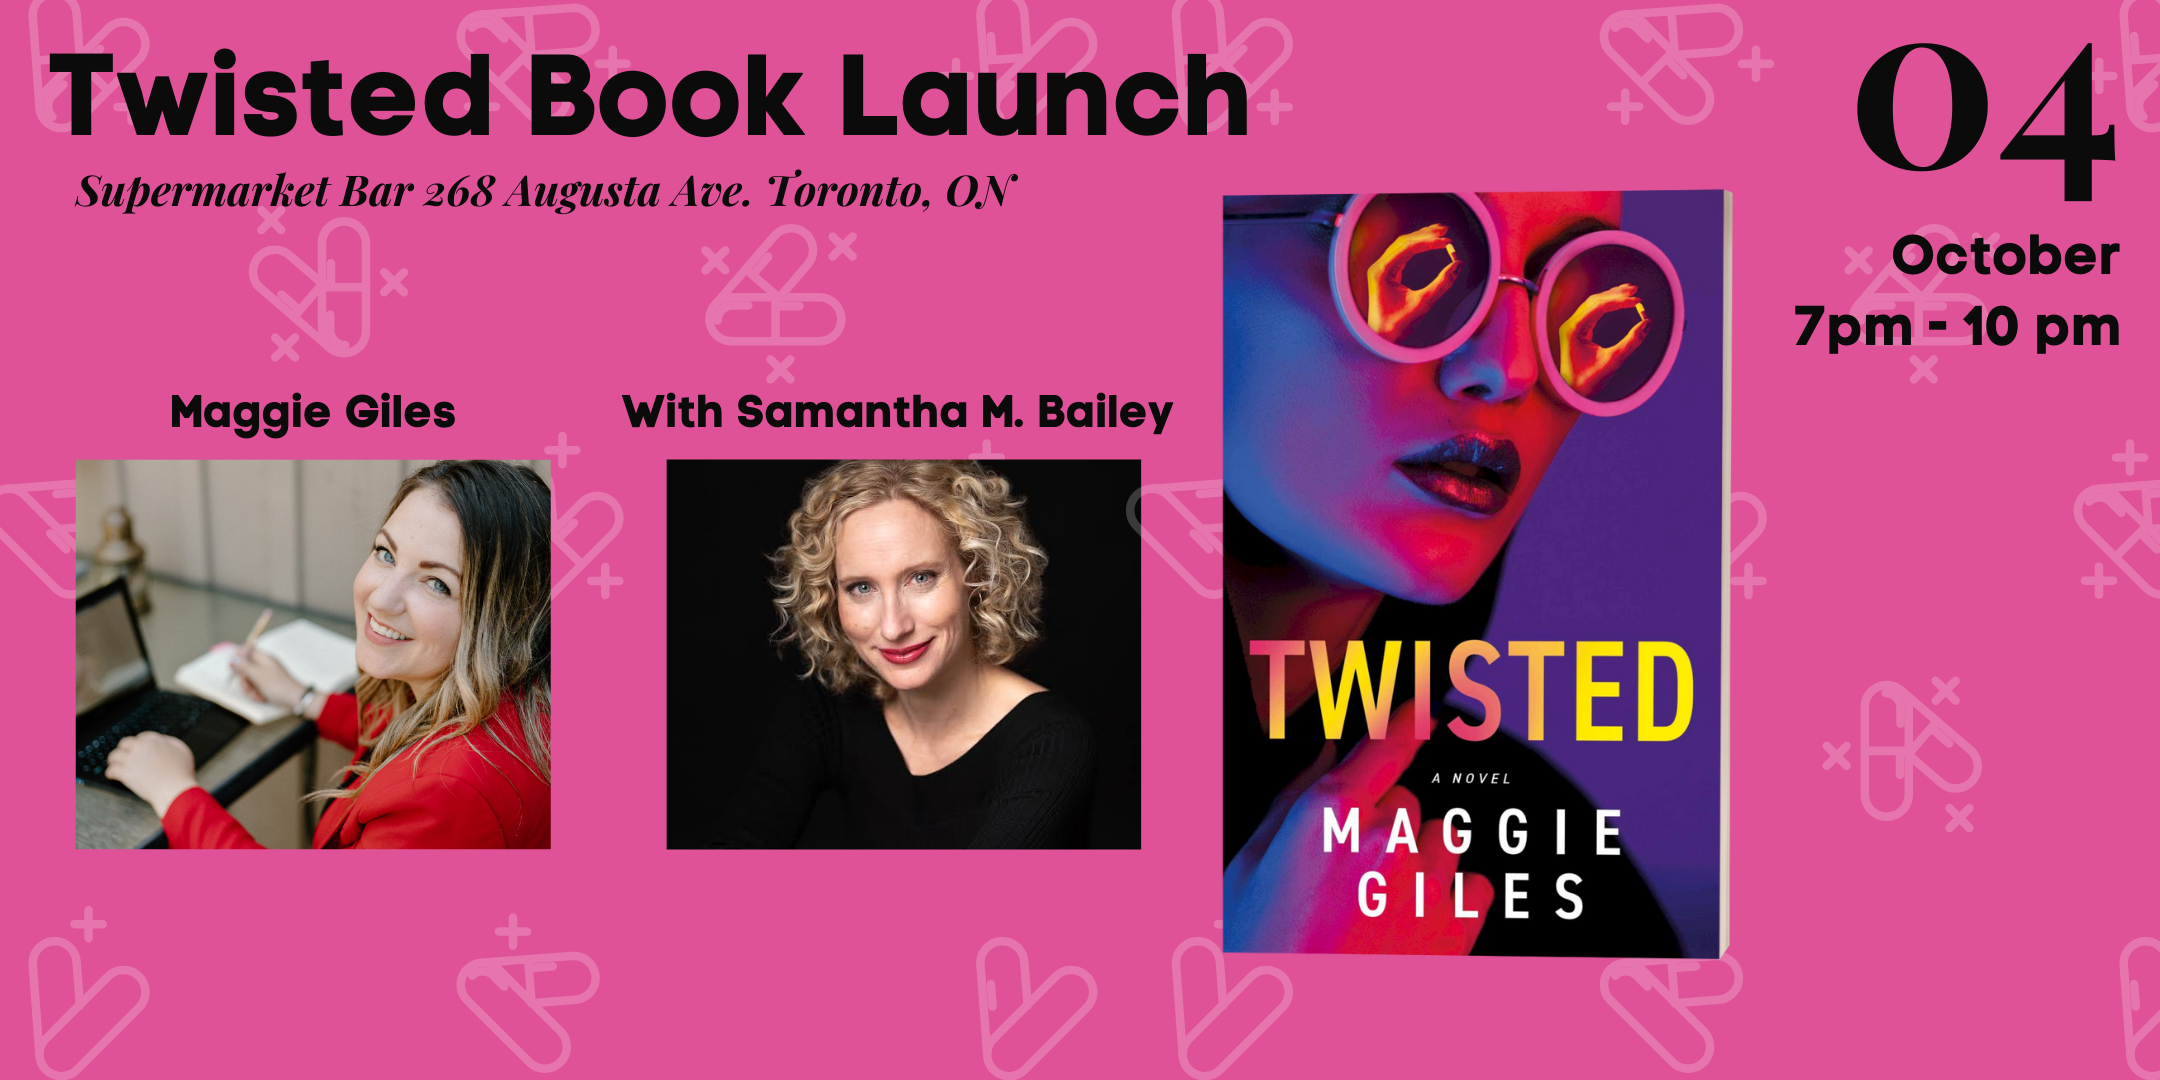 Toronto Twisted Book Launch (2160 × 1080 px) (1)